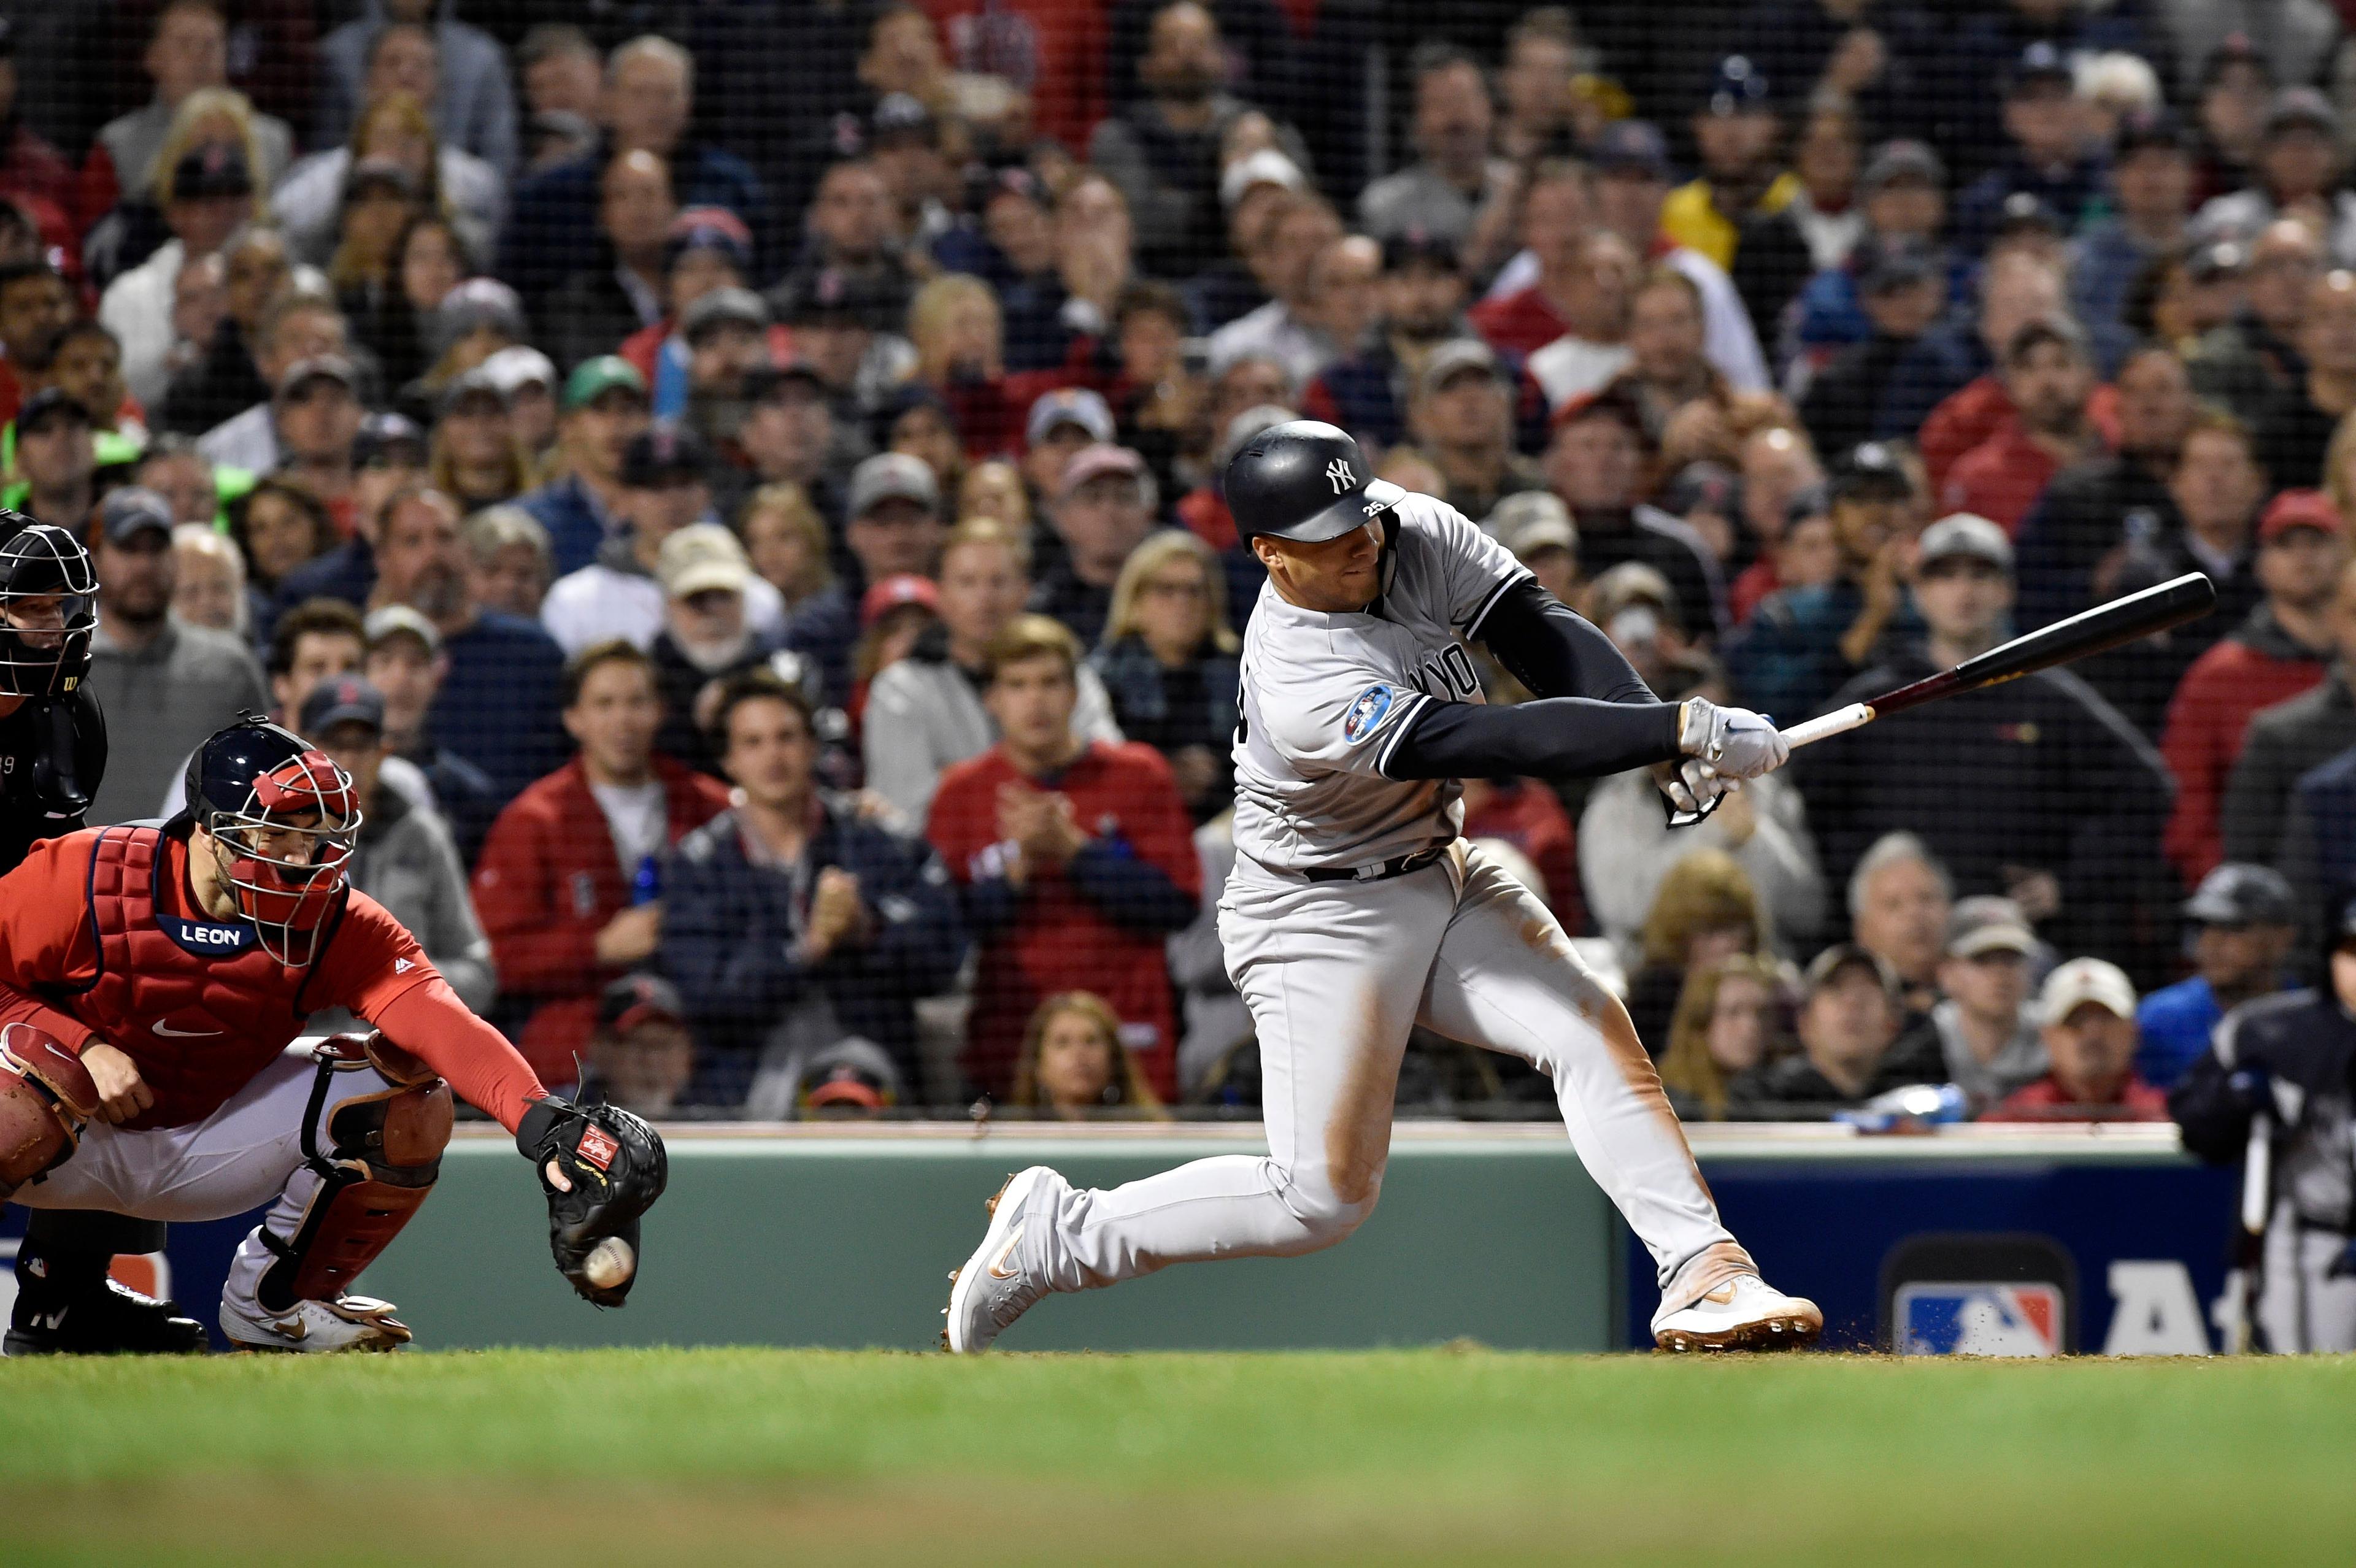 Oct 5, 2018; Boston, MA, USA; New York Yankees second baseman Gleyber Torres (25) strikes out during the sixth inning against the Boston Red Sox in game one of the 2018 NLDS playoff baseball series at Fenway Park. Mandatory Credit: Bob DeChiara-USA TODAY Sports / Bob DeChiara-USA TODAY Sports